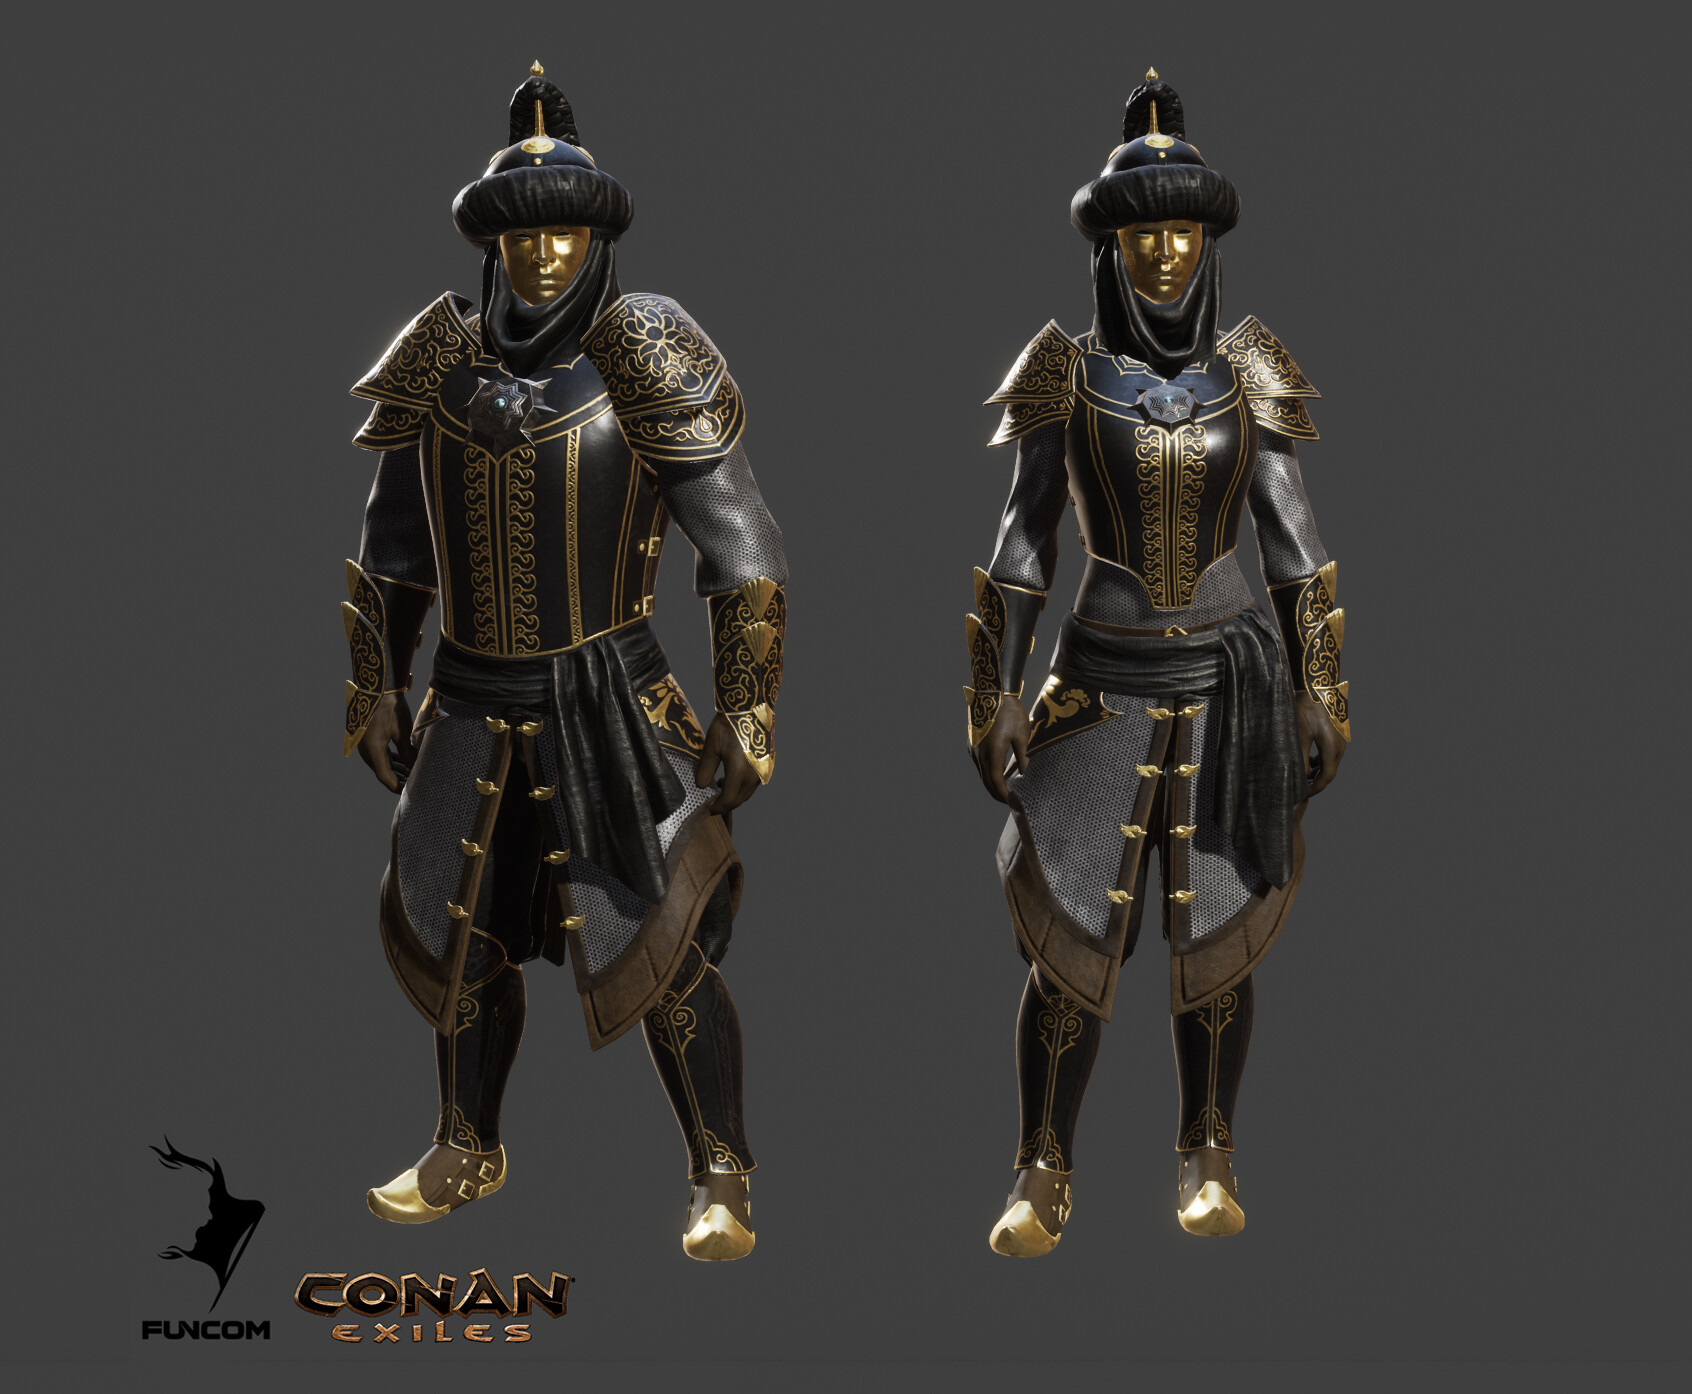 Heavy Armor set from Conan Exiles - Treasures of Turan DLC pack. 